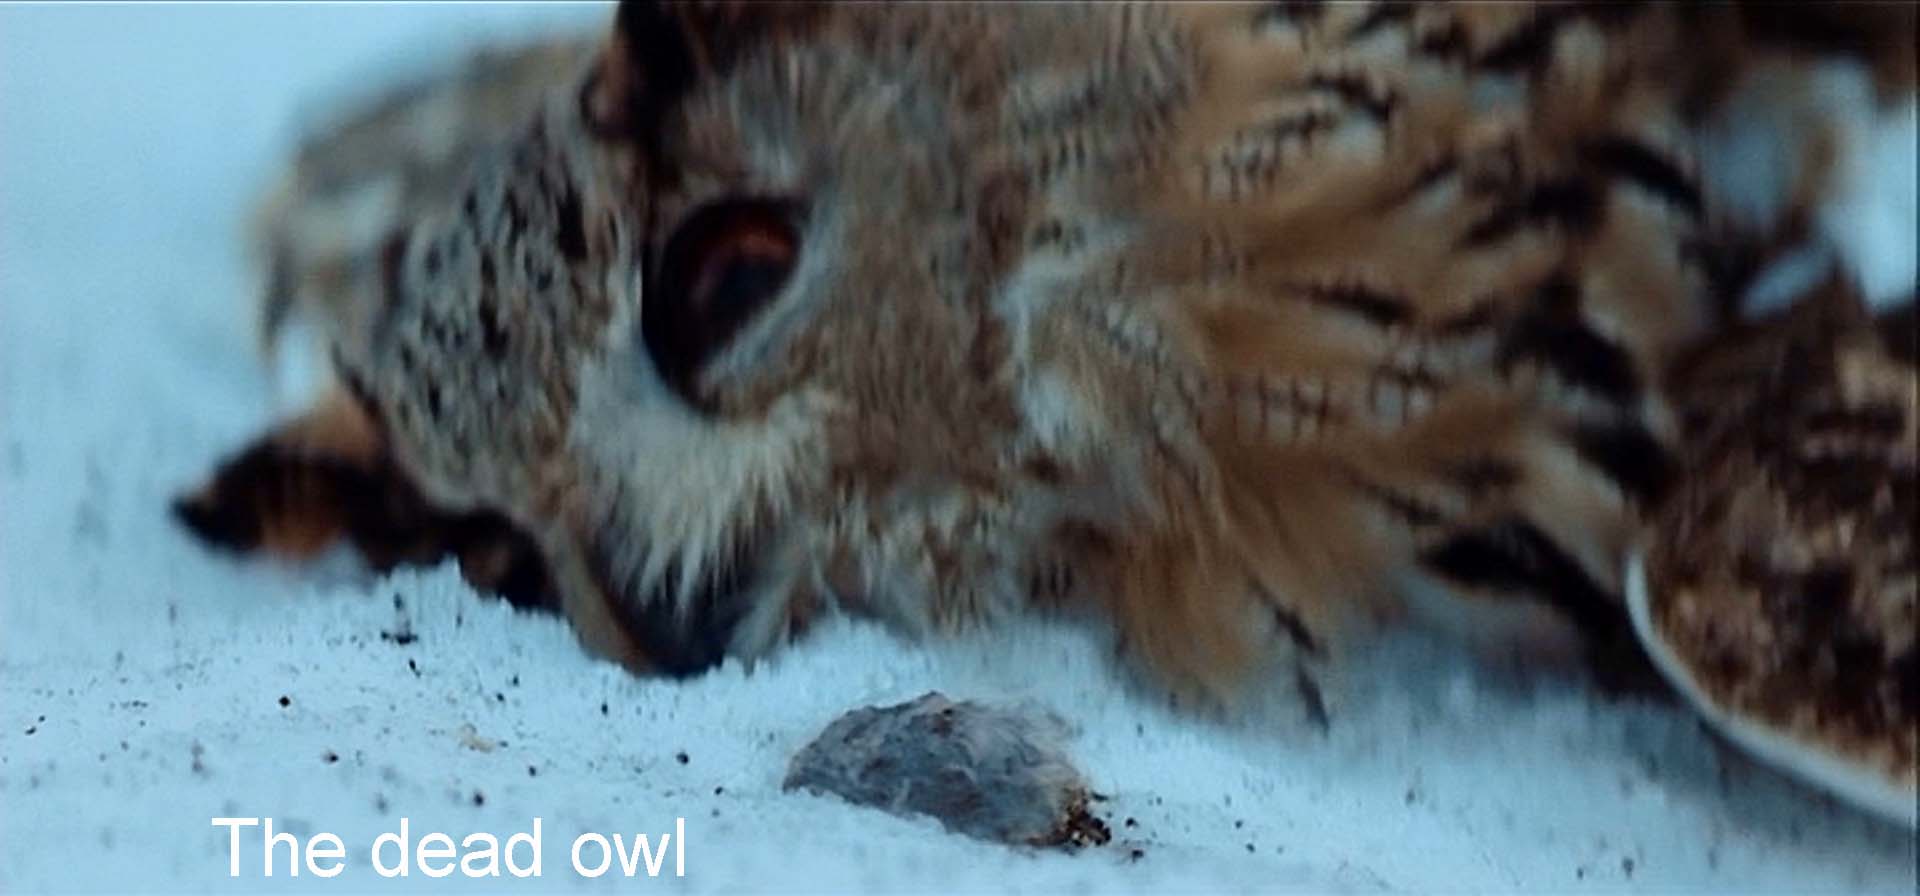 The dying owl